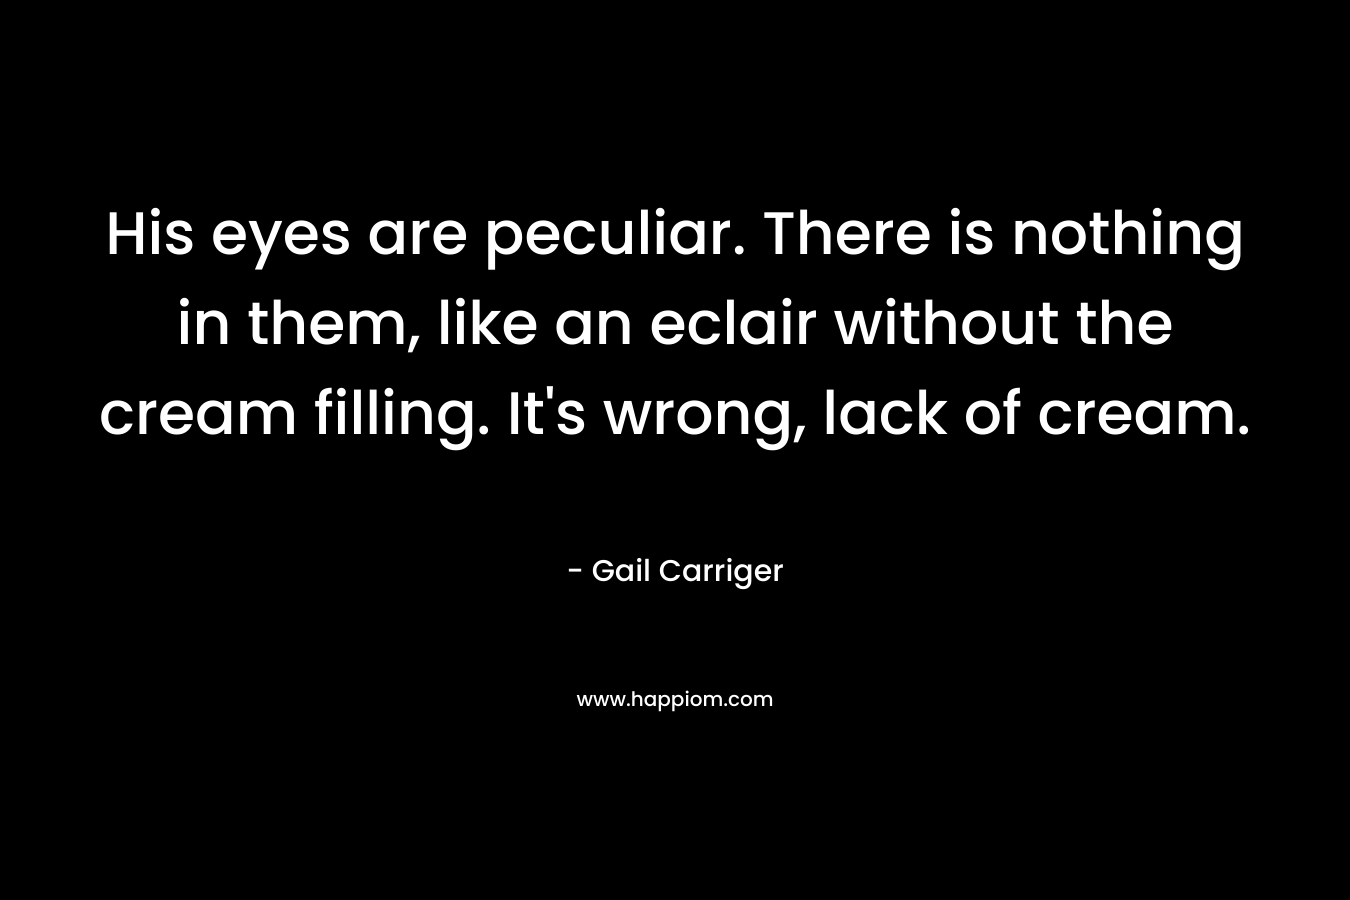 His eyes are peculiar. There is nothing in them, like an eclair without the cream filling. It’s wrong, lack of cream. – Gail Carriger